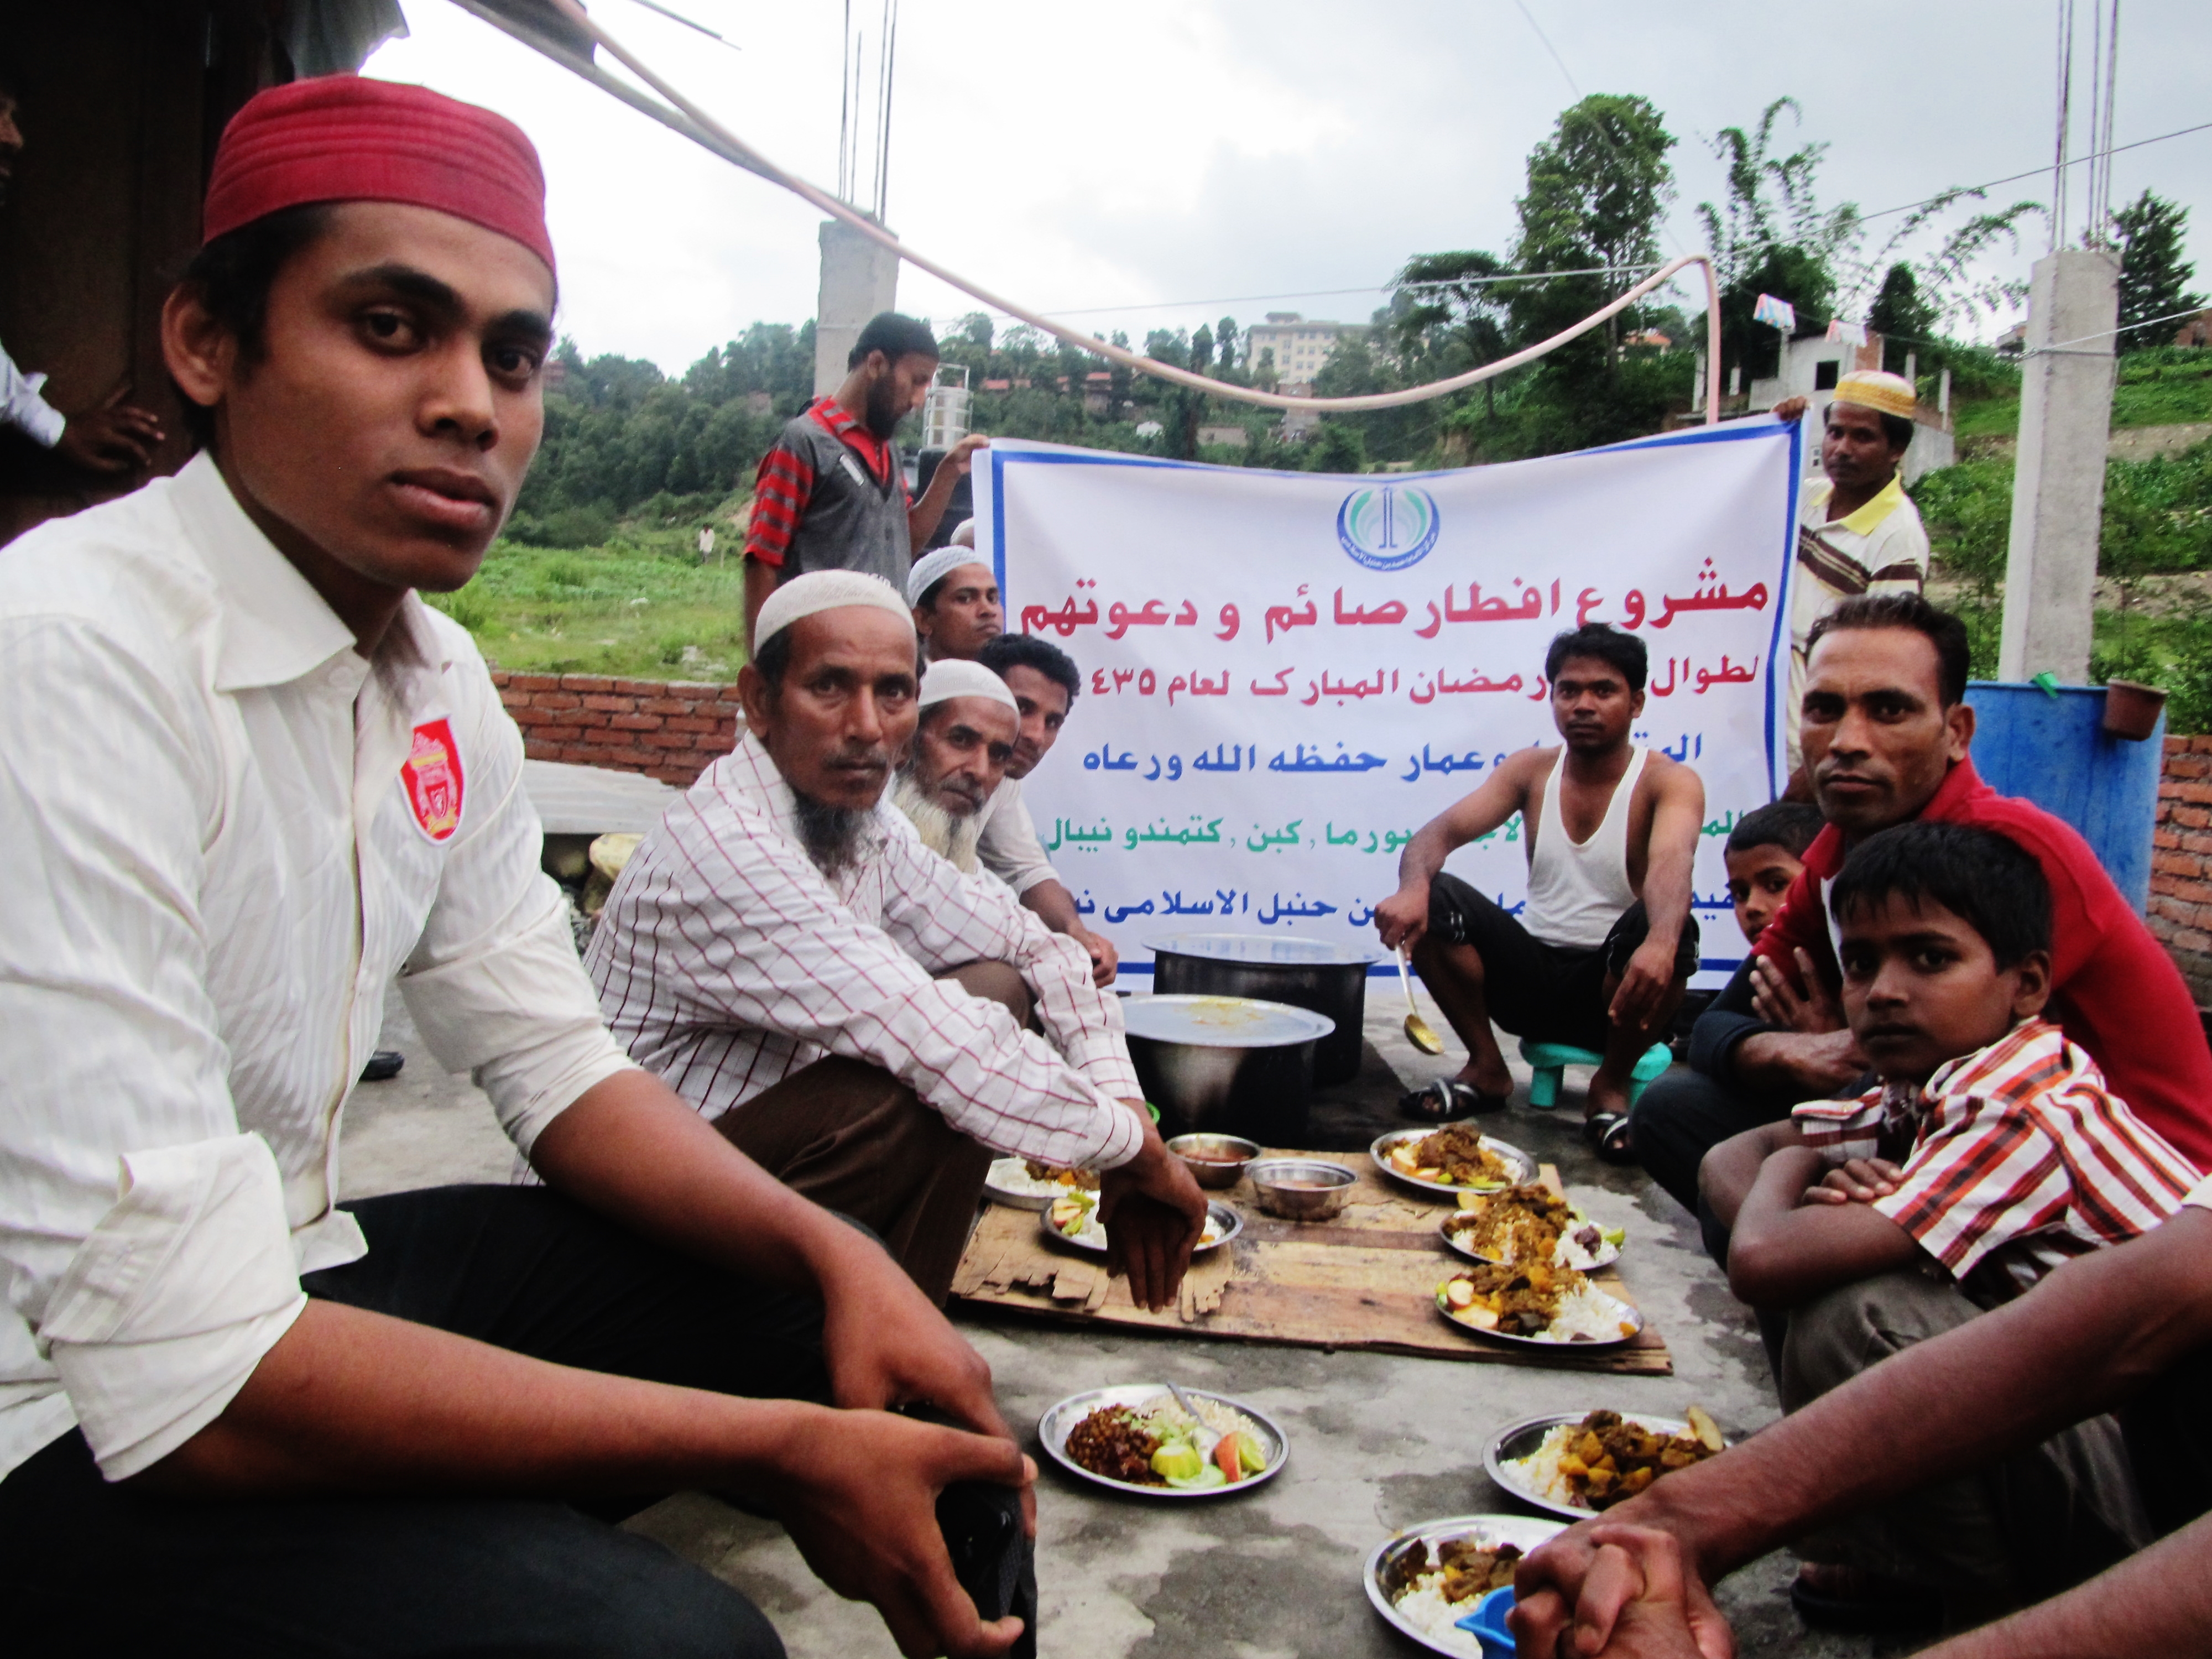 Hassan Hassan, left, with fellow Rohingya refugees on the outskirts of Kathmandu in July 2014 (Sabrina Toppa for TIME)